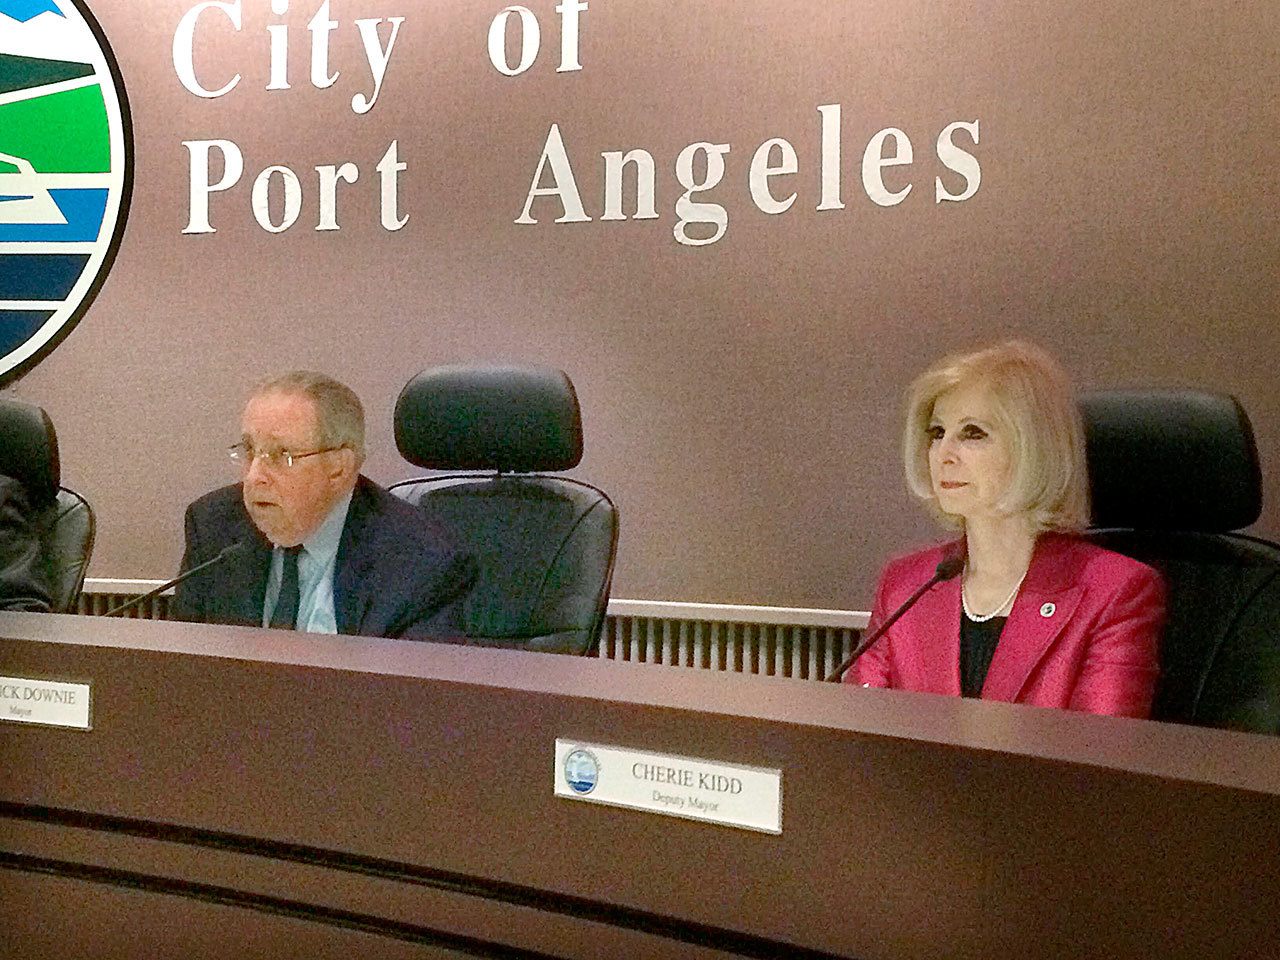 The Port Angeles City Council approved Mayor Patrick Downie reading a statement Tuesday about council members following the Open Public Meetings Act rather than admonish Deputy Mayor Cherie Kidd, right, for violating the ethics code. (Paul Gottlieb/Peninsula Daily News)